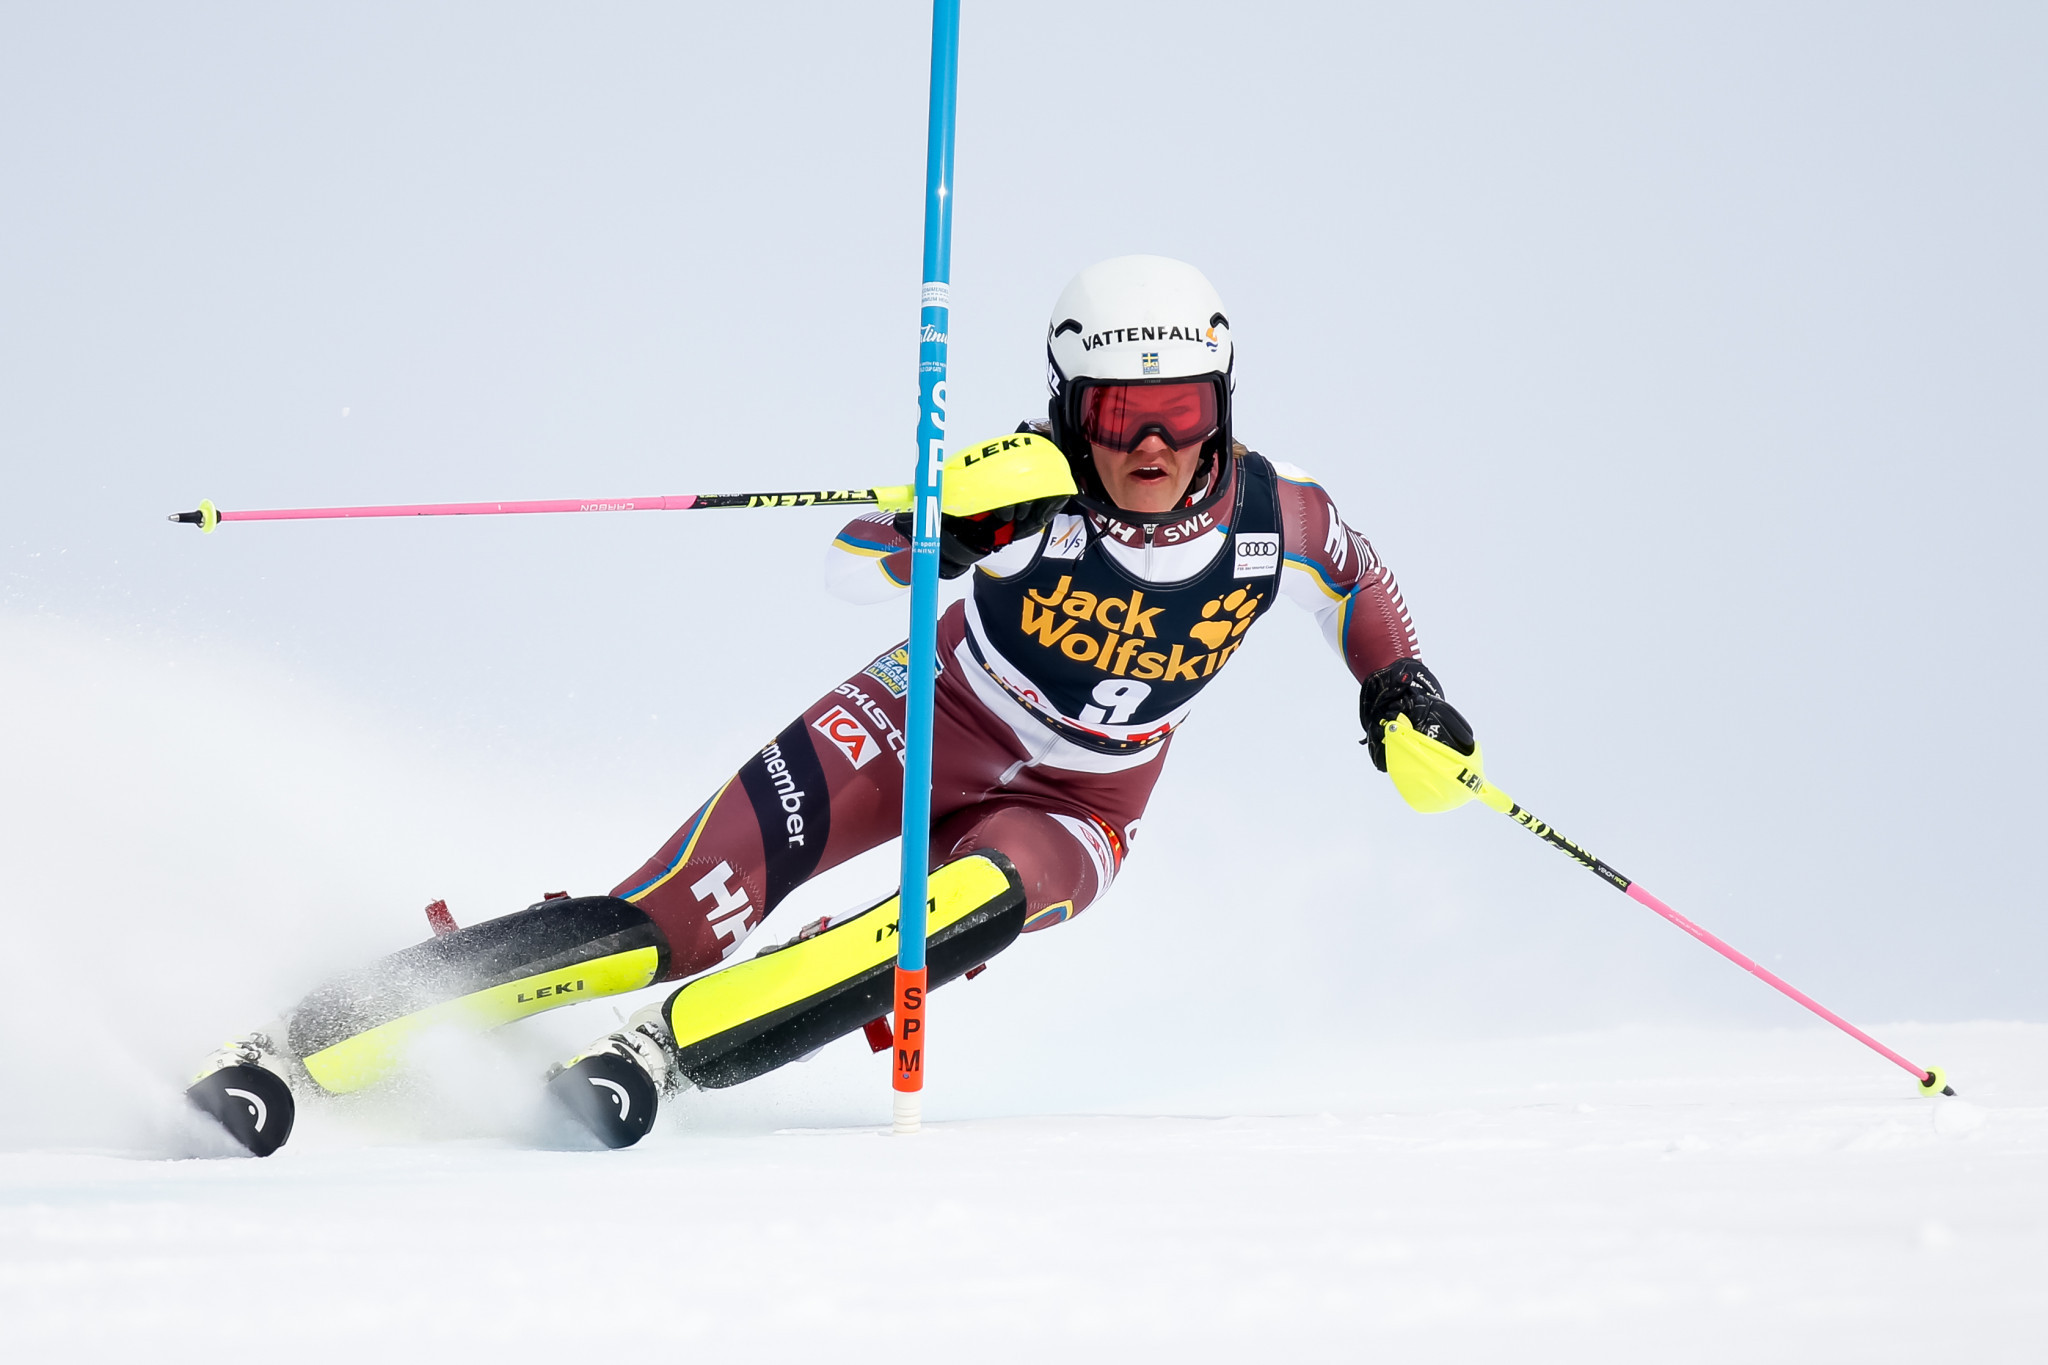 Anna Swenn-Larsson had led the competition but crashed on the final run ©Getty Images